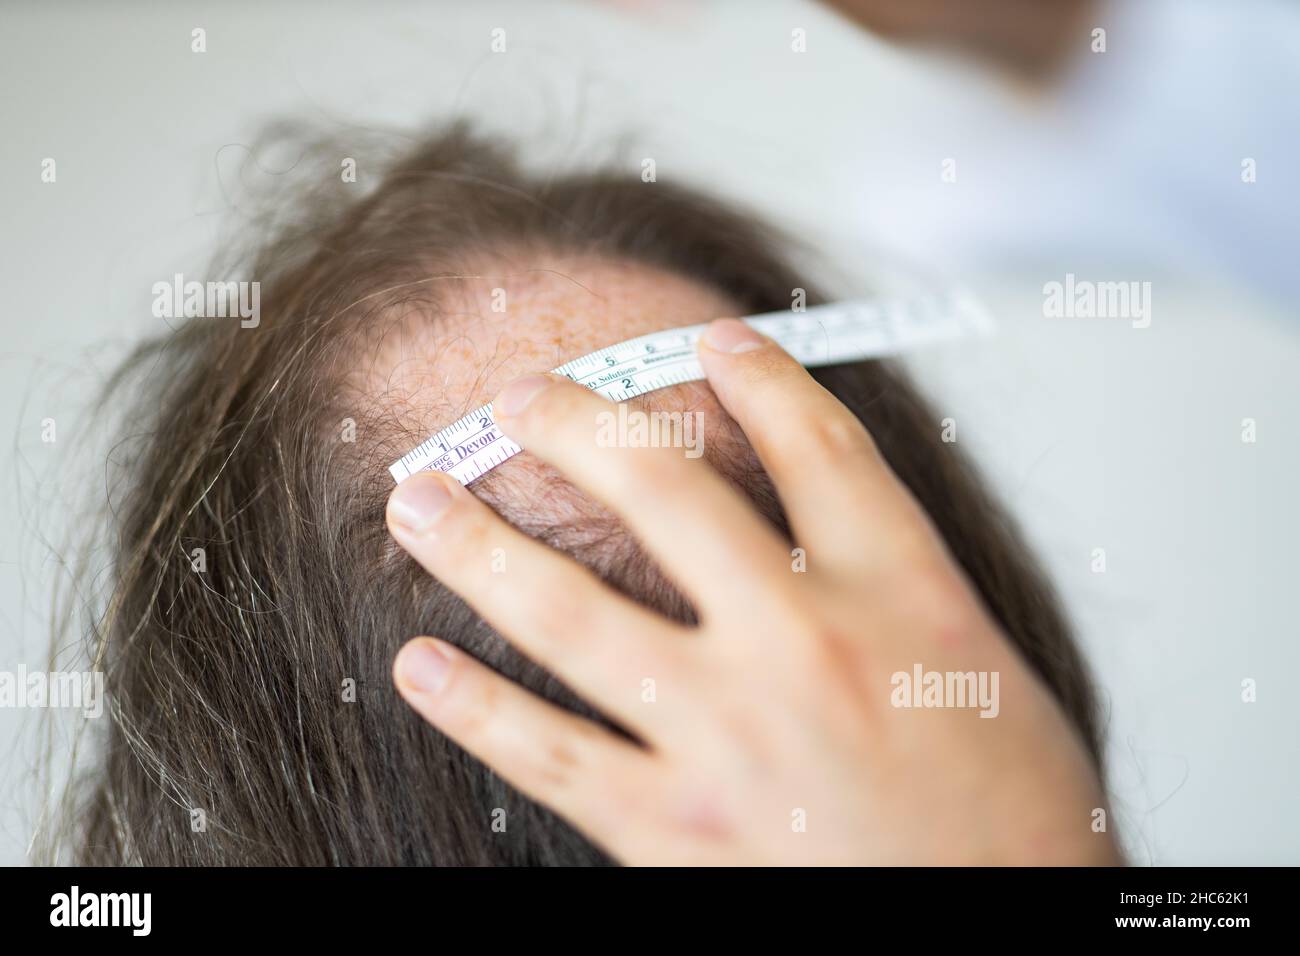 Closeup of woman's hands working for hair transplant preparation on man's head Stock Photo